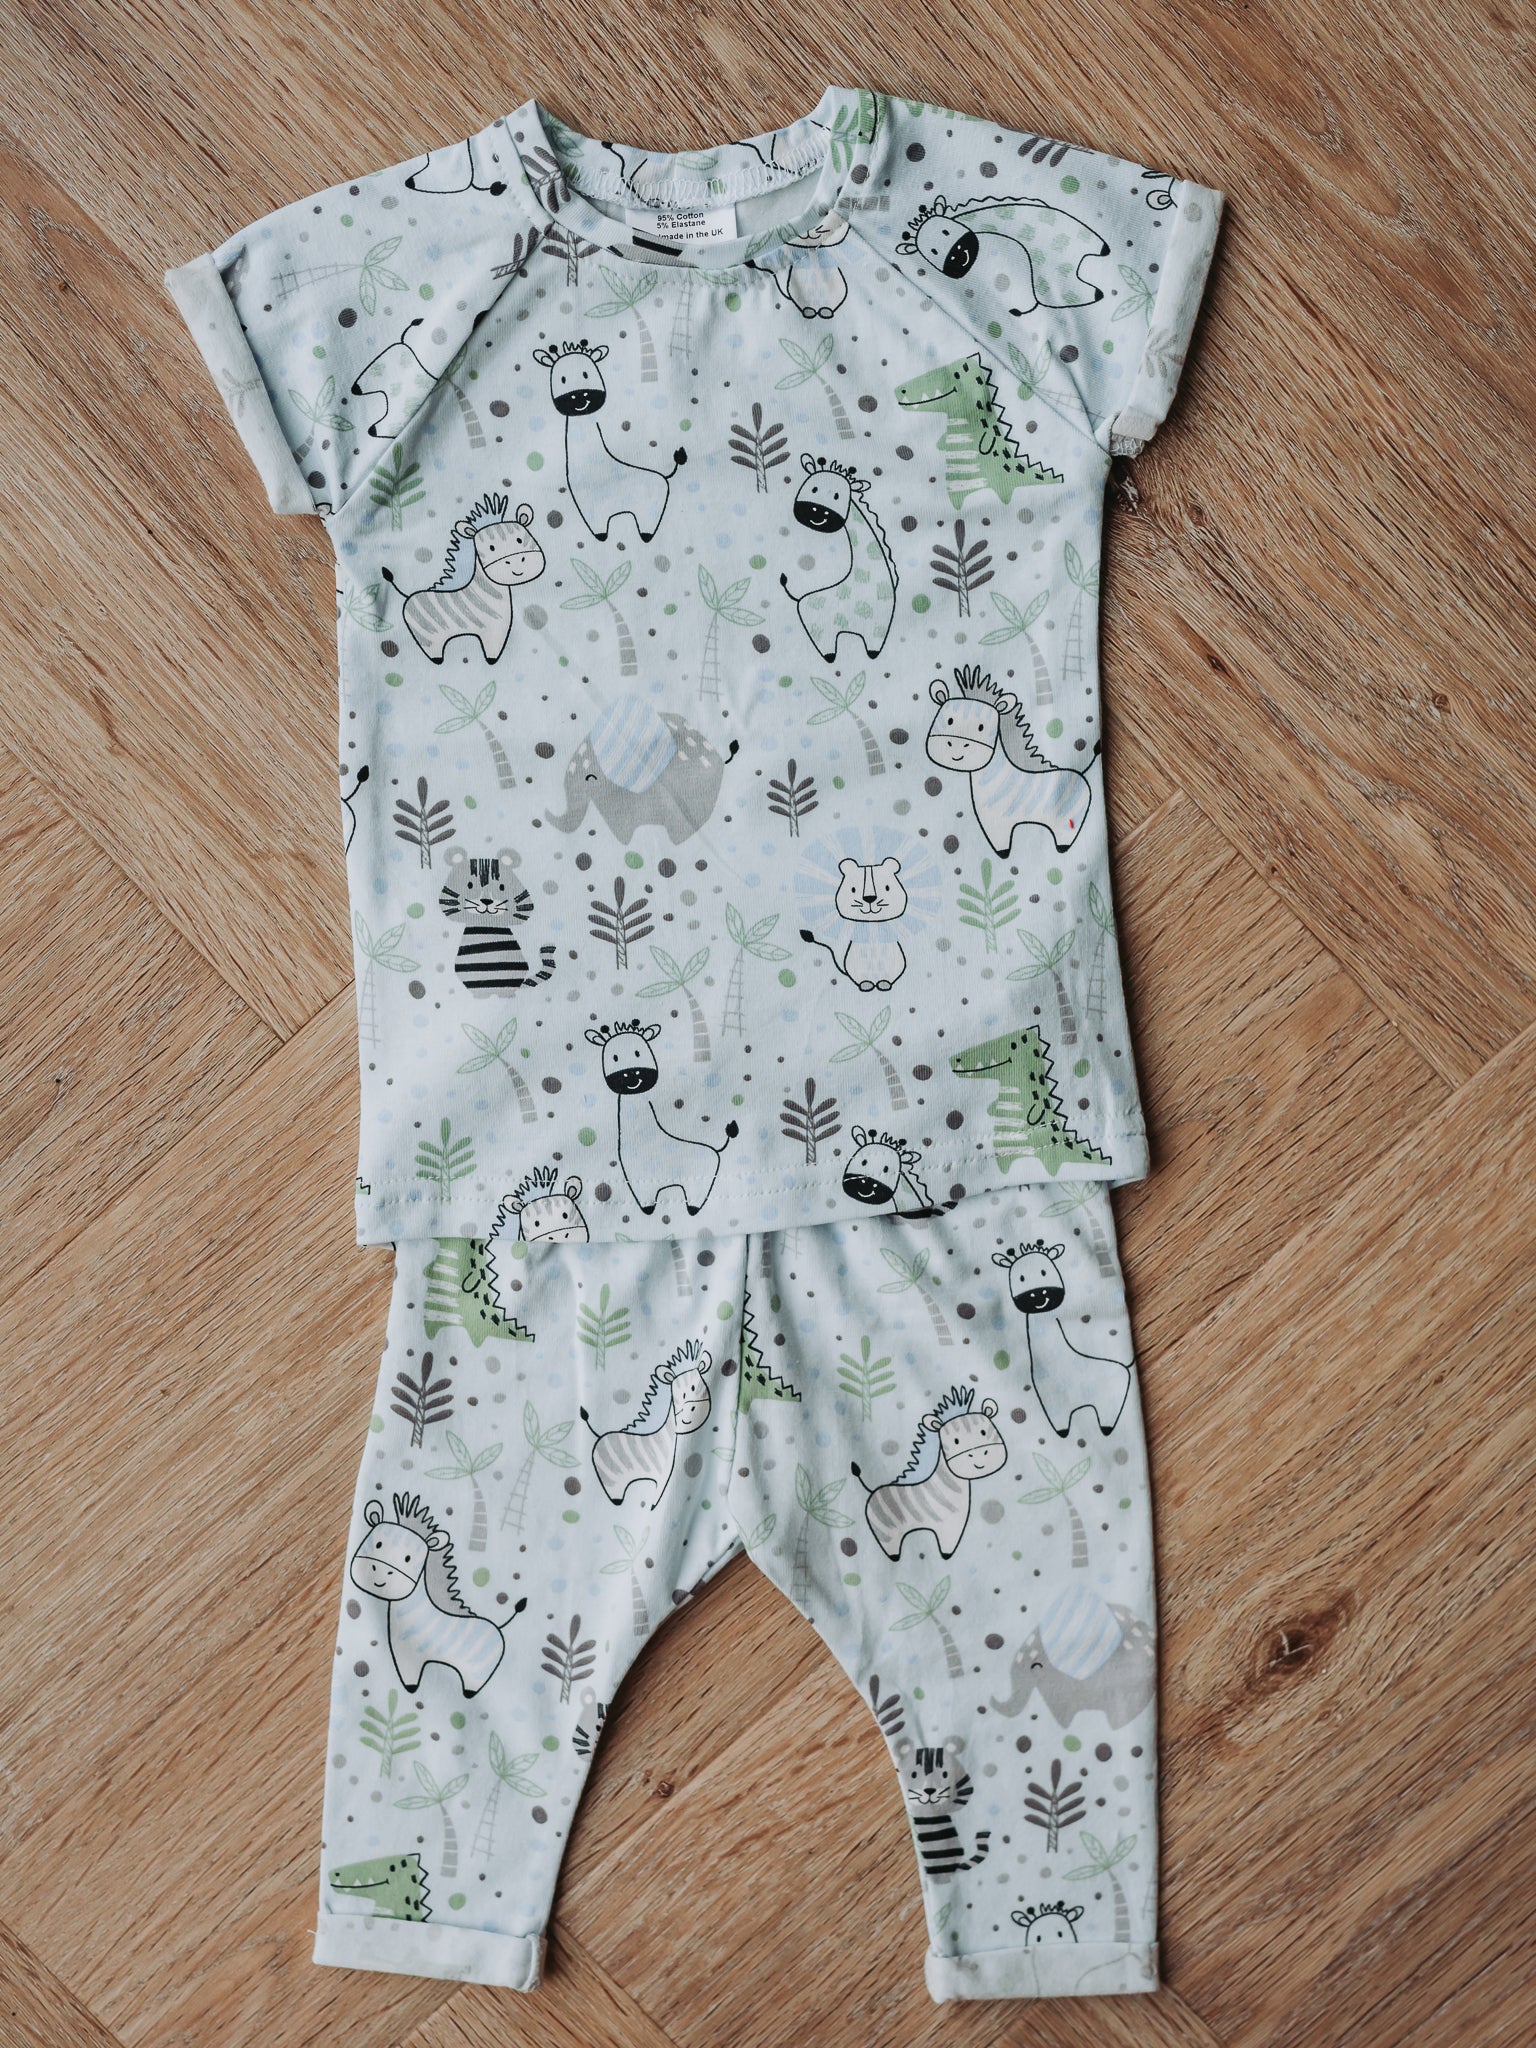 Baby Animals Outfit Bundle